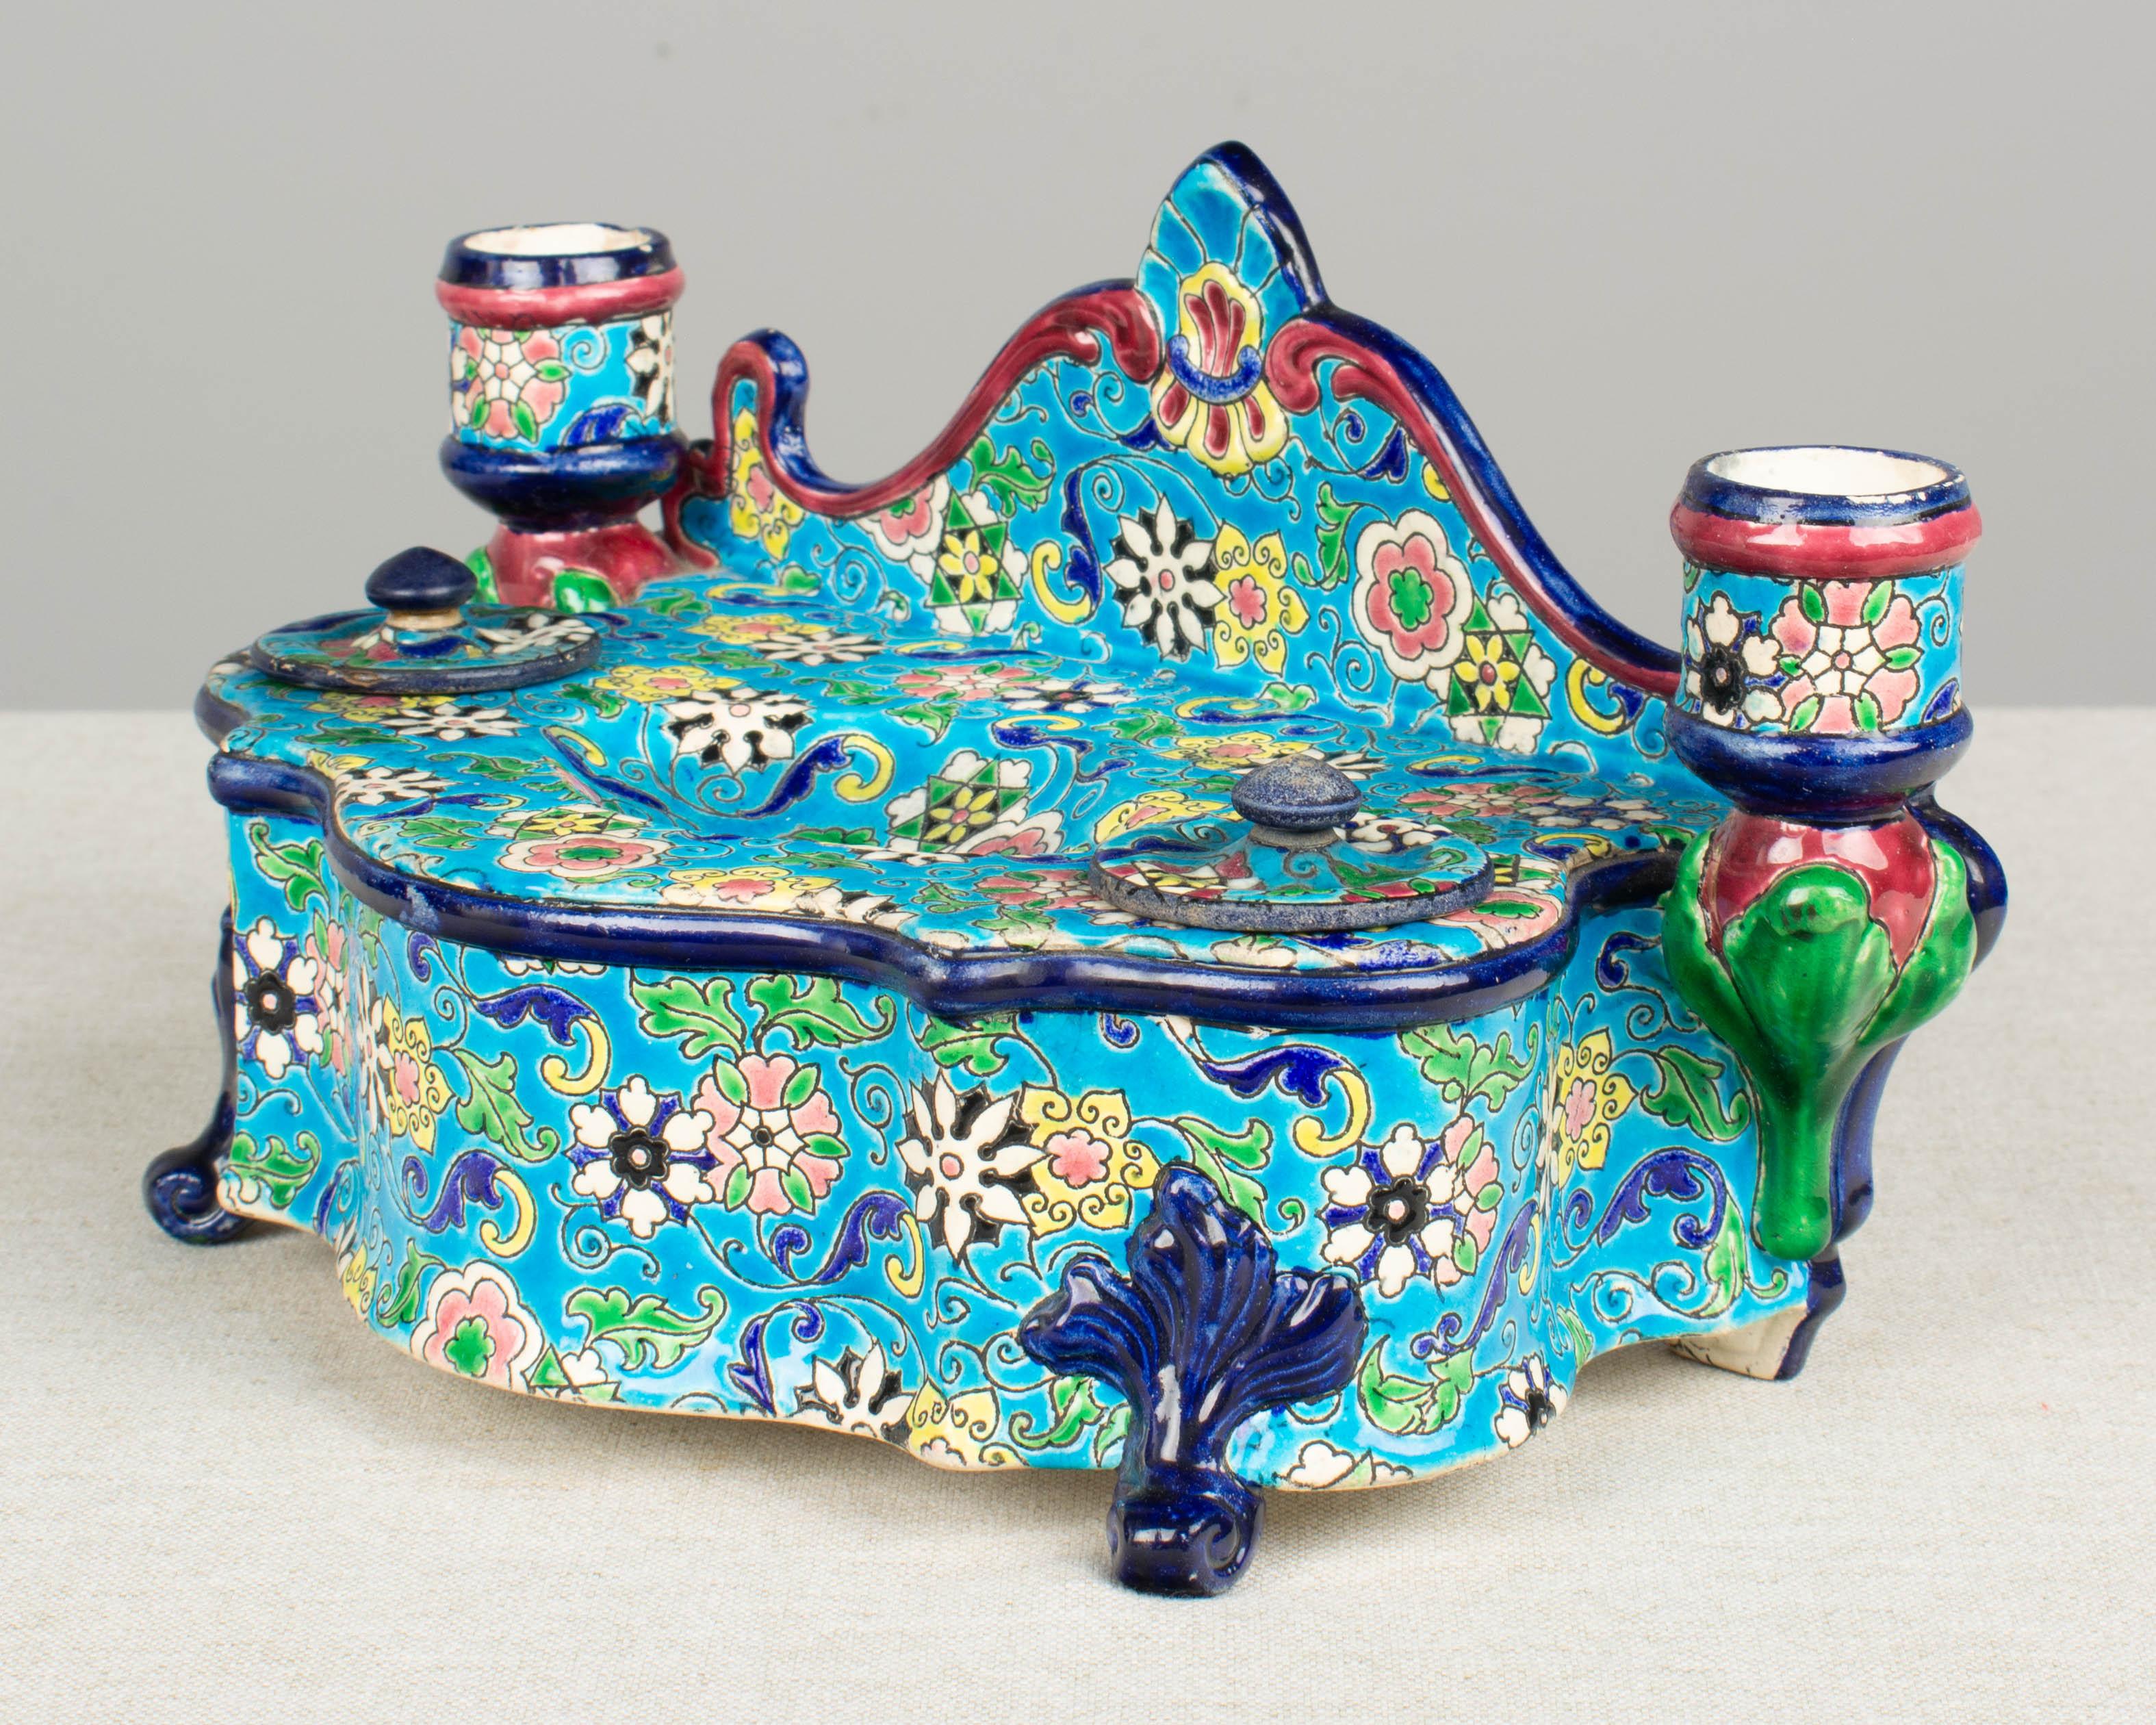 A 19th century French Longwy ceramic desk set with inkwells and candle holders. Beautiful cloisonné enamel floral design with vibrant blue pink, rose, green and yellow on bright turquoise ground. There are no ink pot inserts. Wear to the enamel,